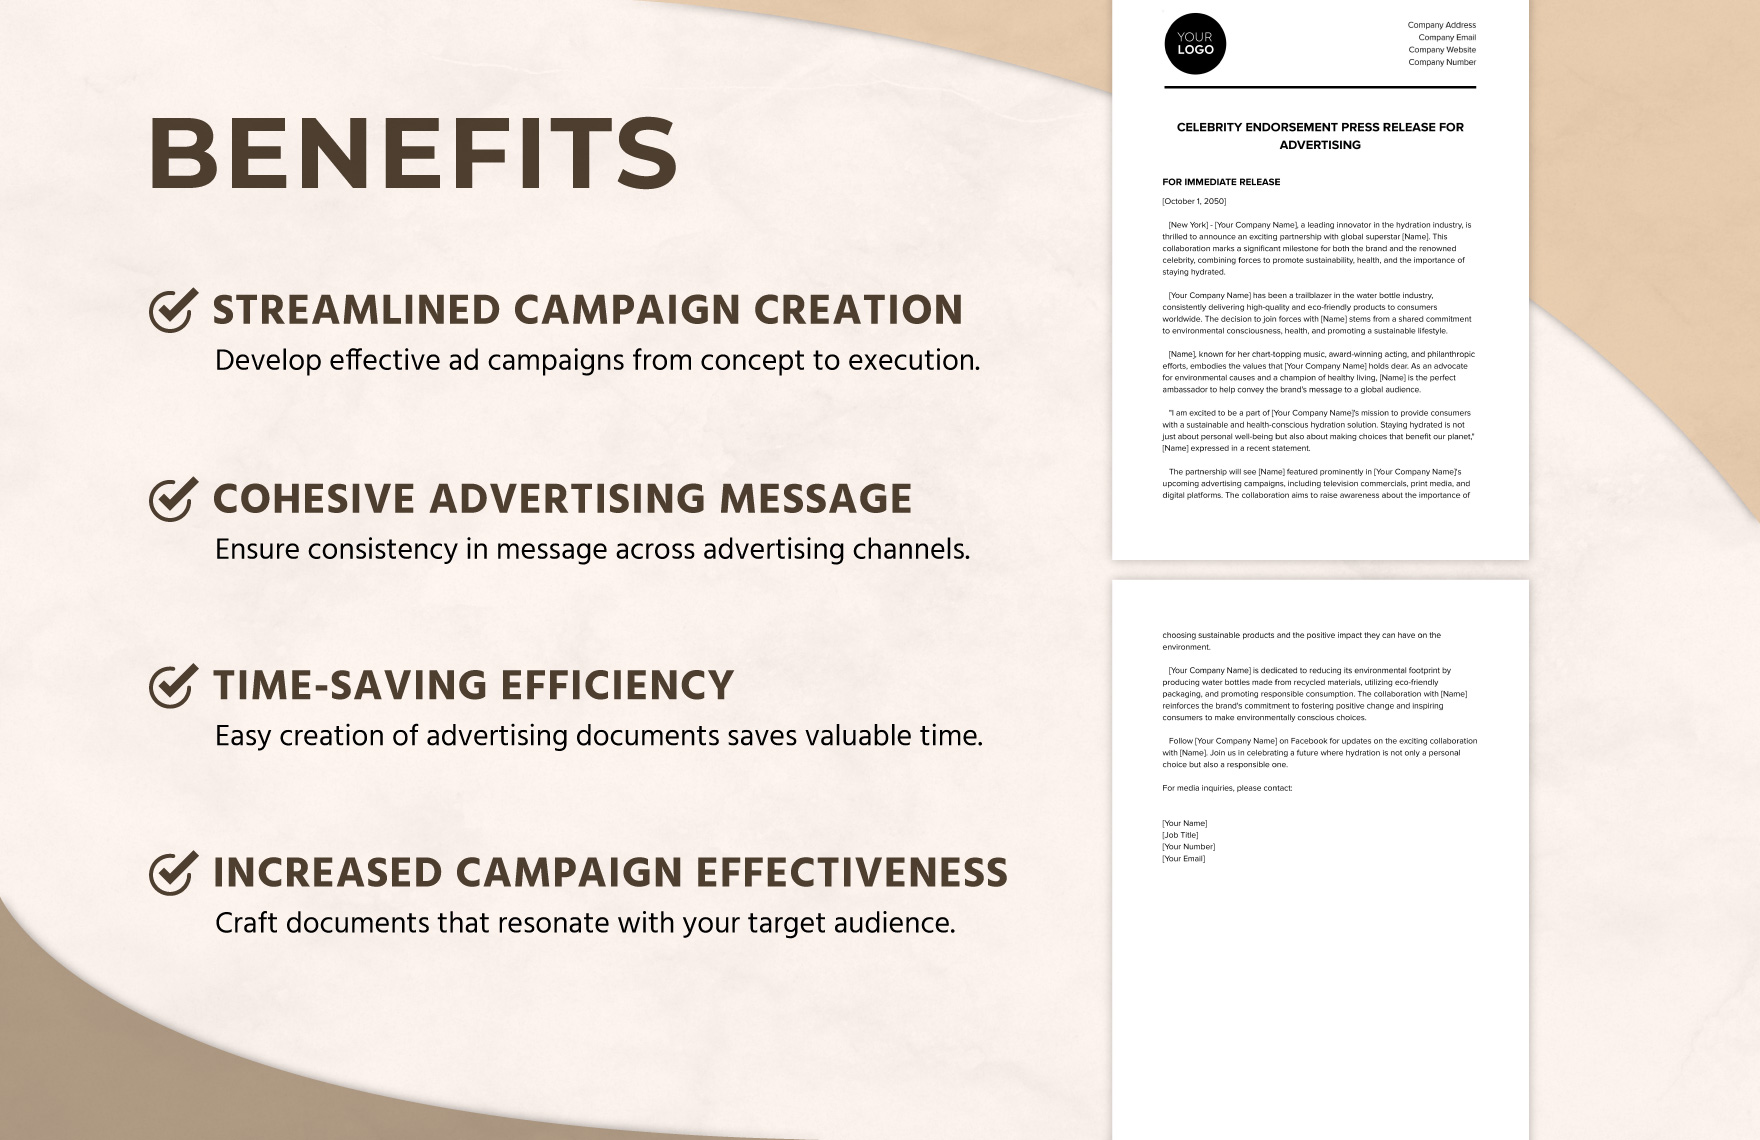 Celebrity Endorsement Press Release for Advertising Template